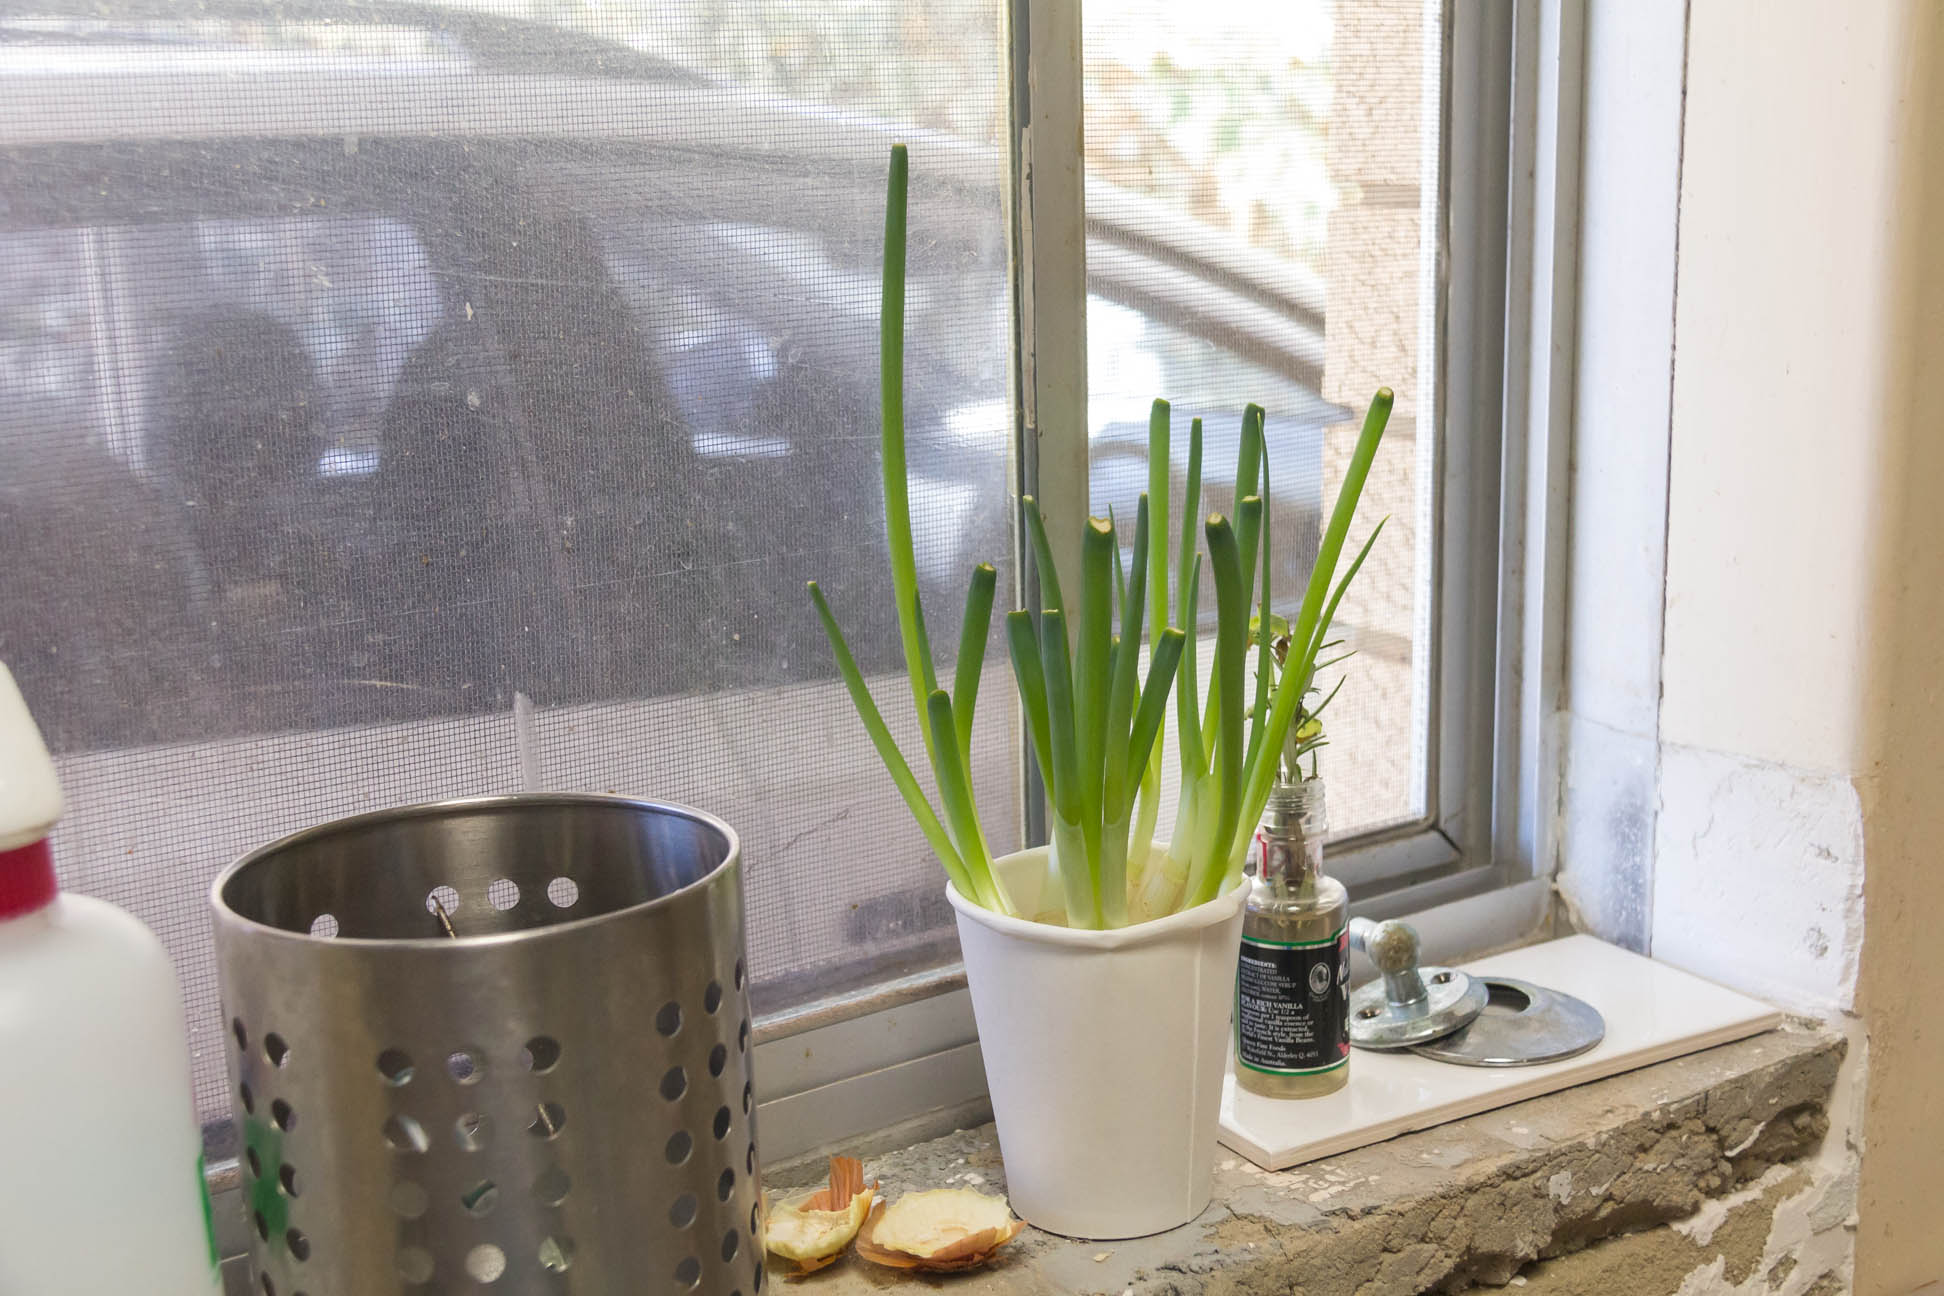 12/01/15 Day 7 of re-growing store-bought Spring Onions.  